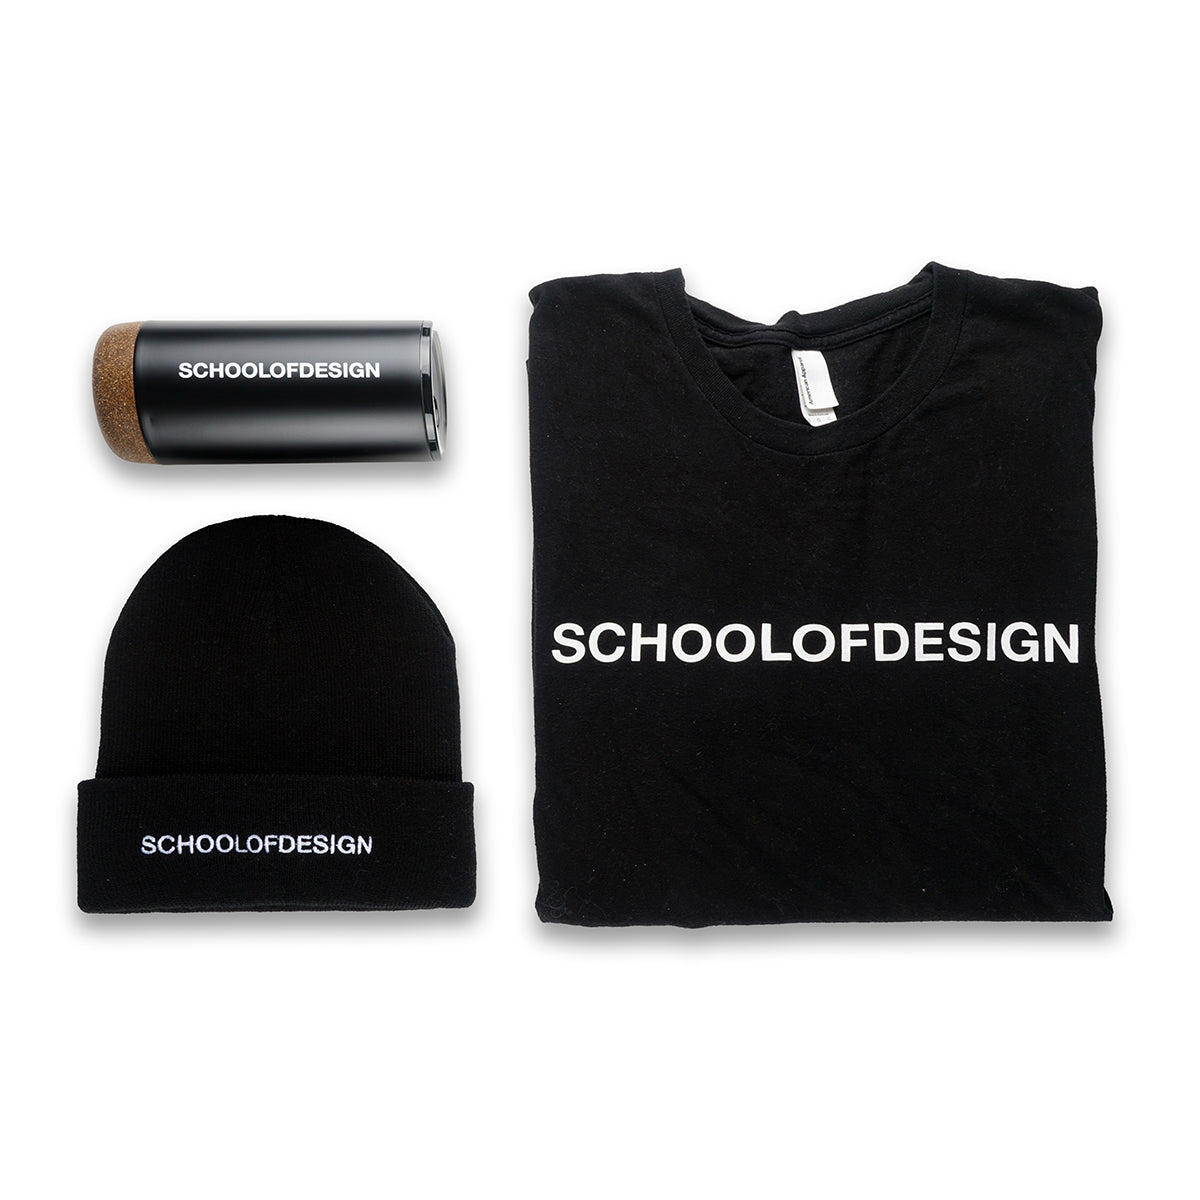 bundle featuring school of design black travel mug, 100% cotton t shirt with school of design white text and black toque with embroidered school of design text in white